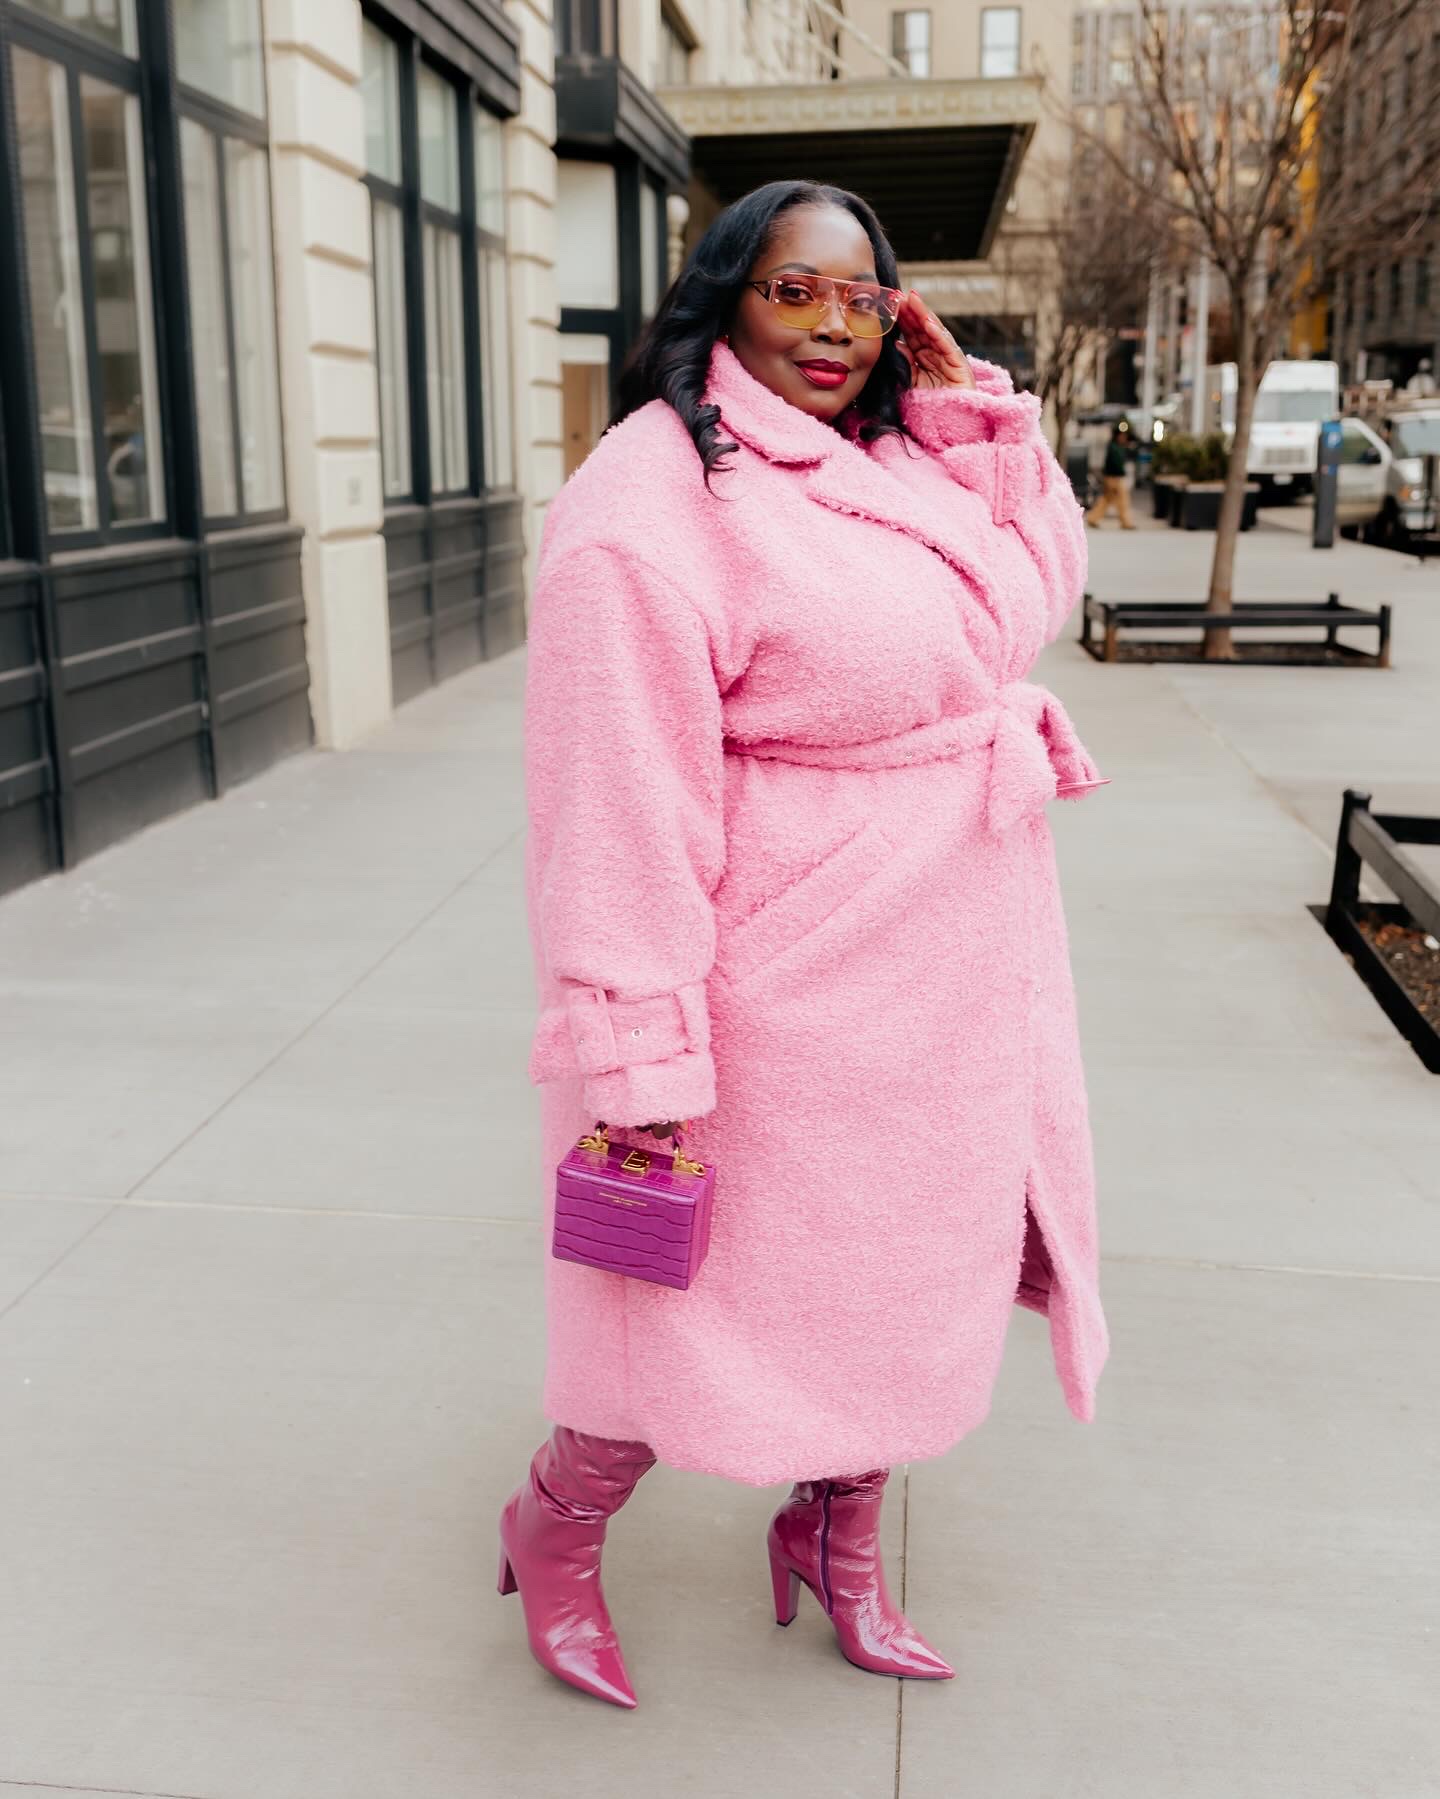  New York Fashion Week style. plus size winter coat in pink with purple patent leather boots from vince camuto